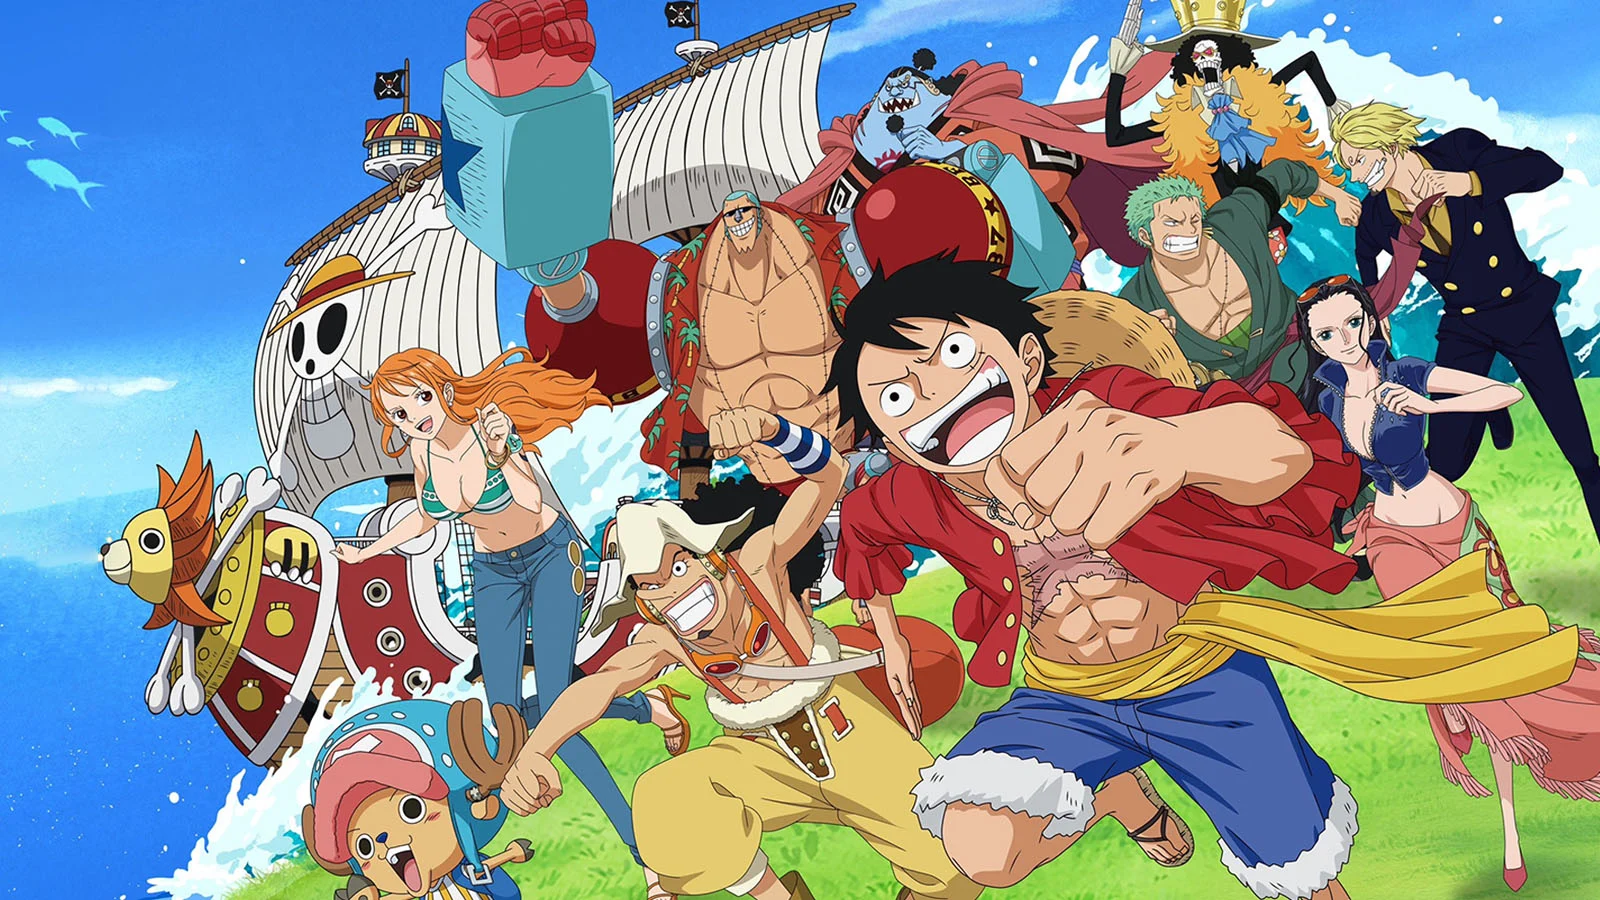 How 'One Piece' Manga Became a School Subject: Matching Taylor Swift's Classroom Impact